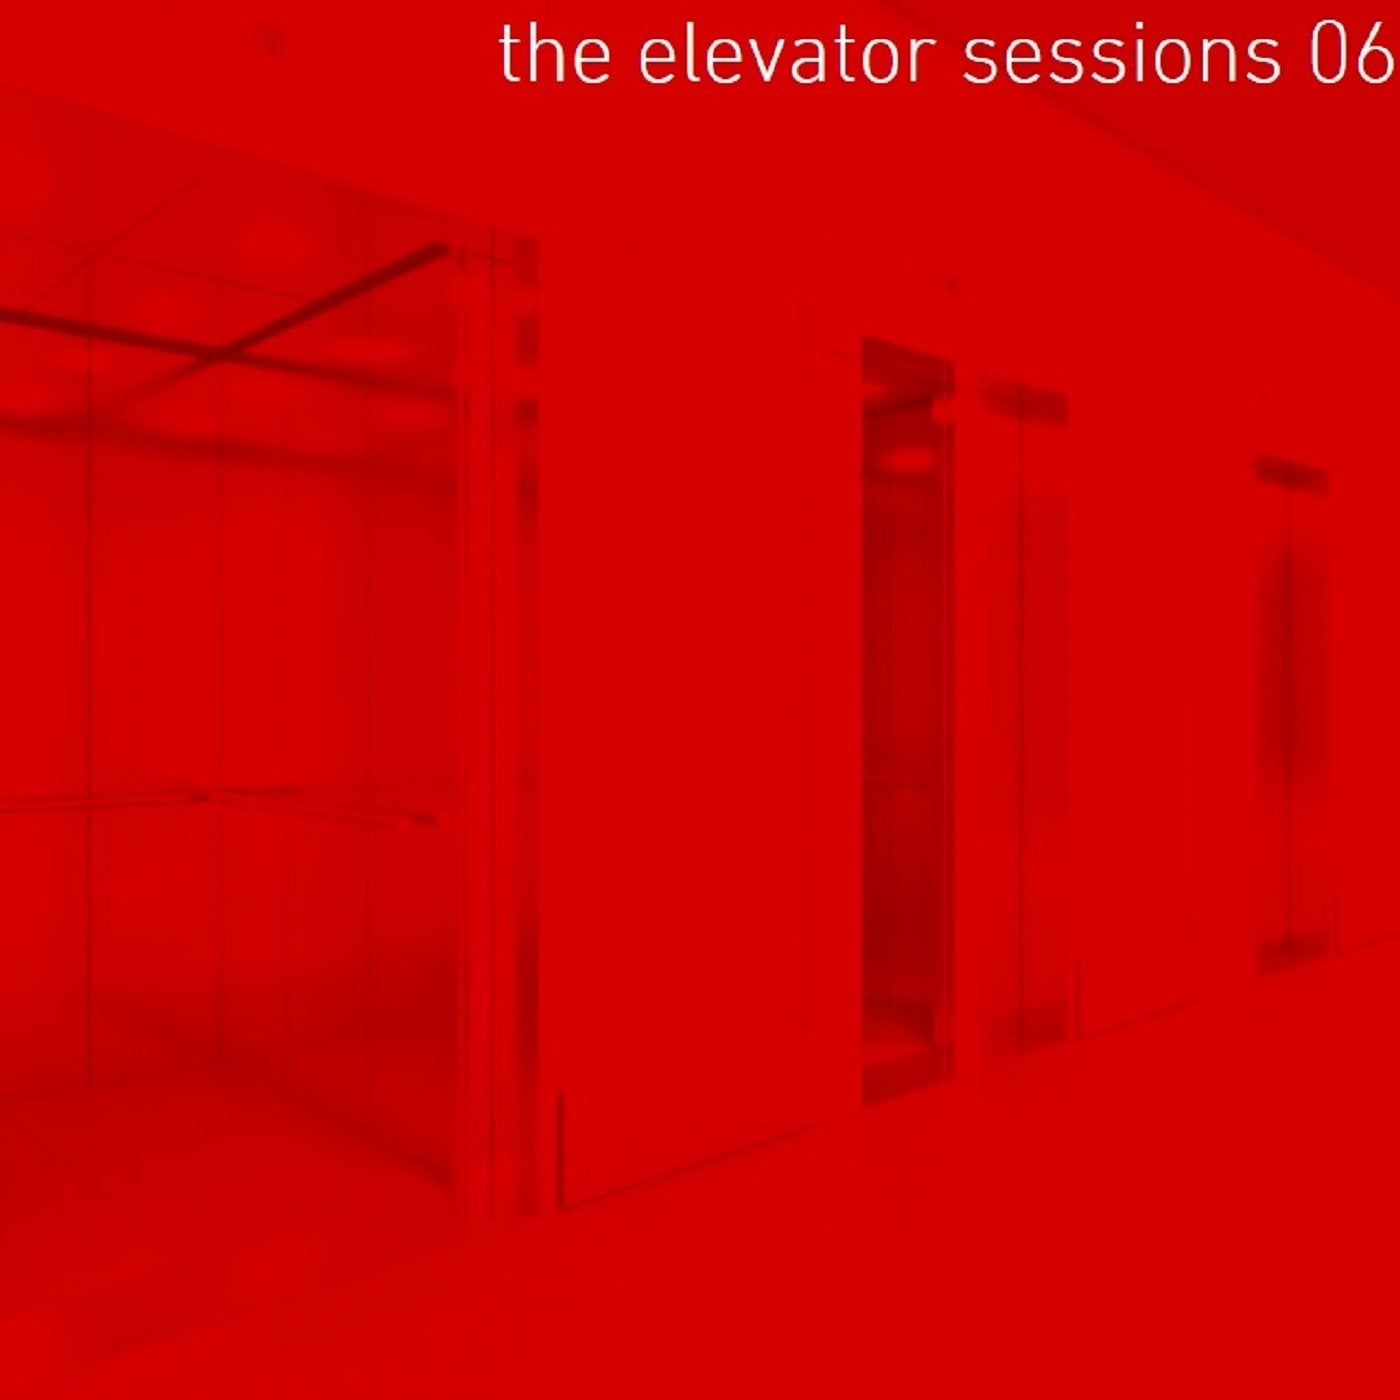 The Elevator Sessions 06 (Compiled & Mixed by Klangstein)